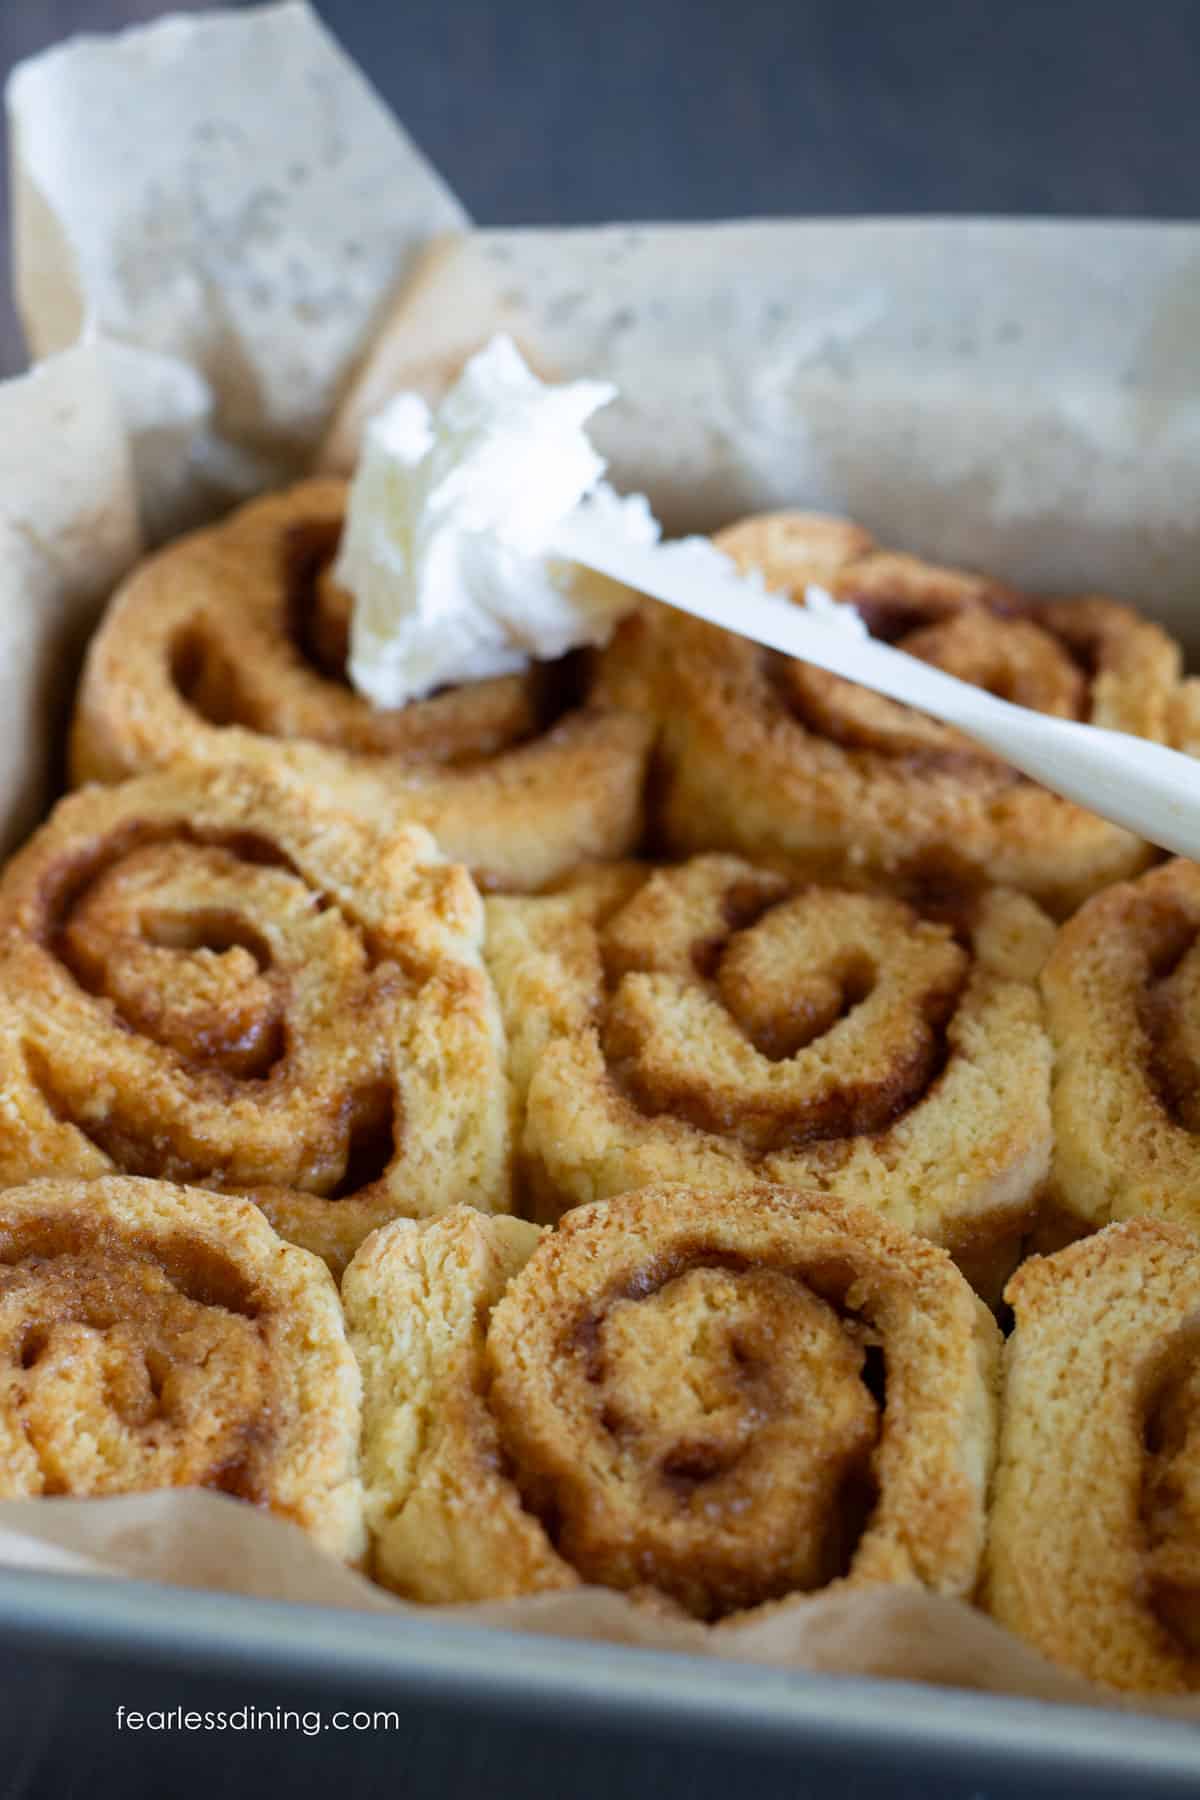 Spreading the frosting over the cinnamon rolls.